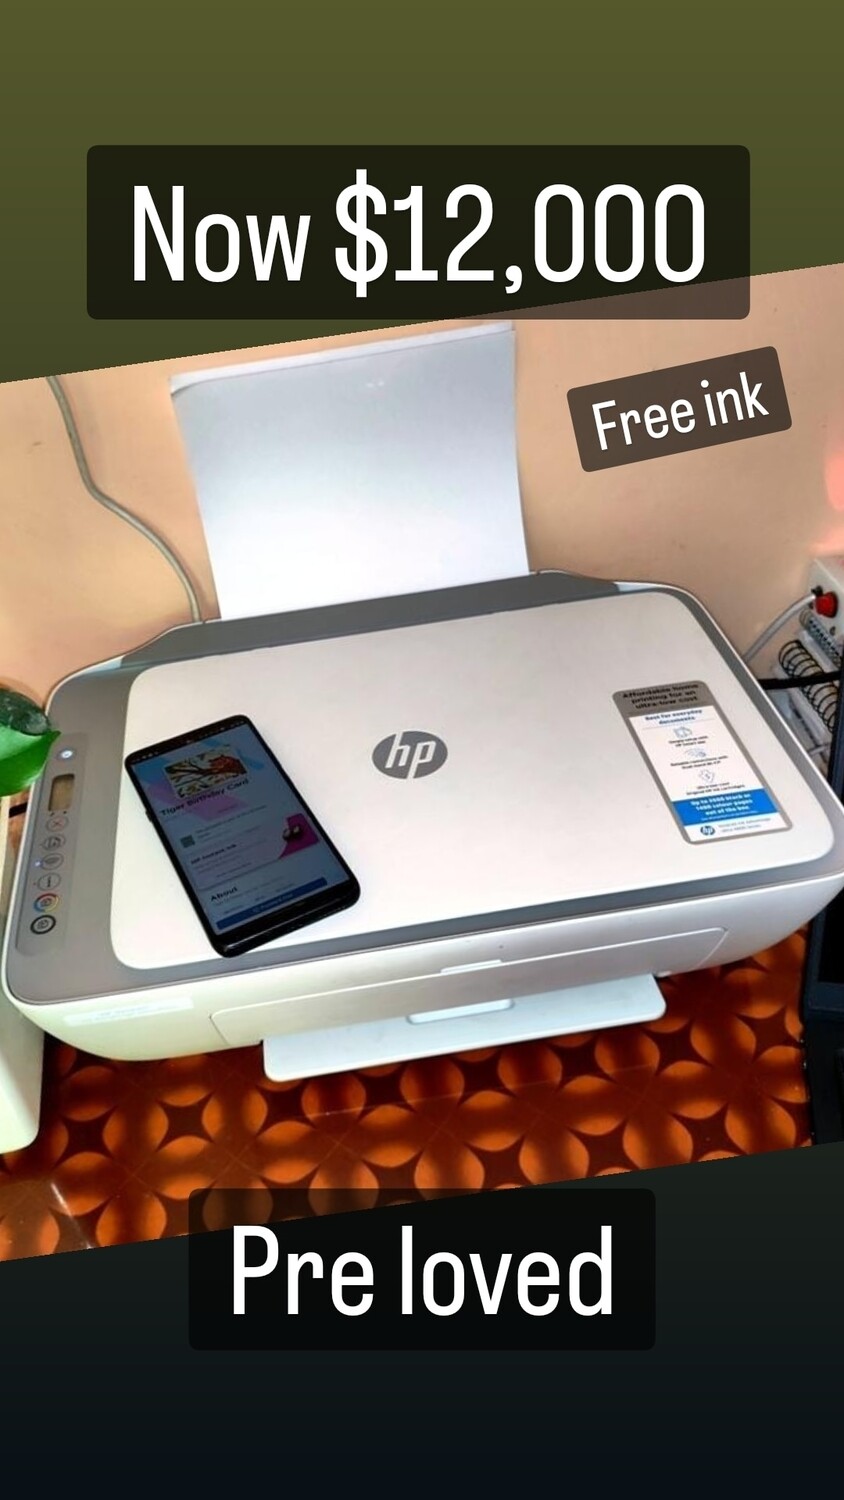 WIRELESS PRINTER WITH FREE INK